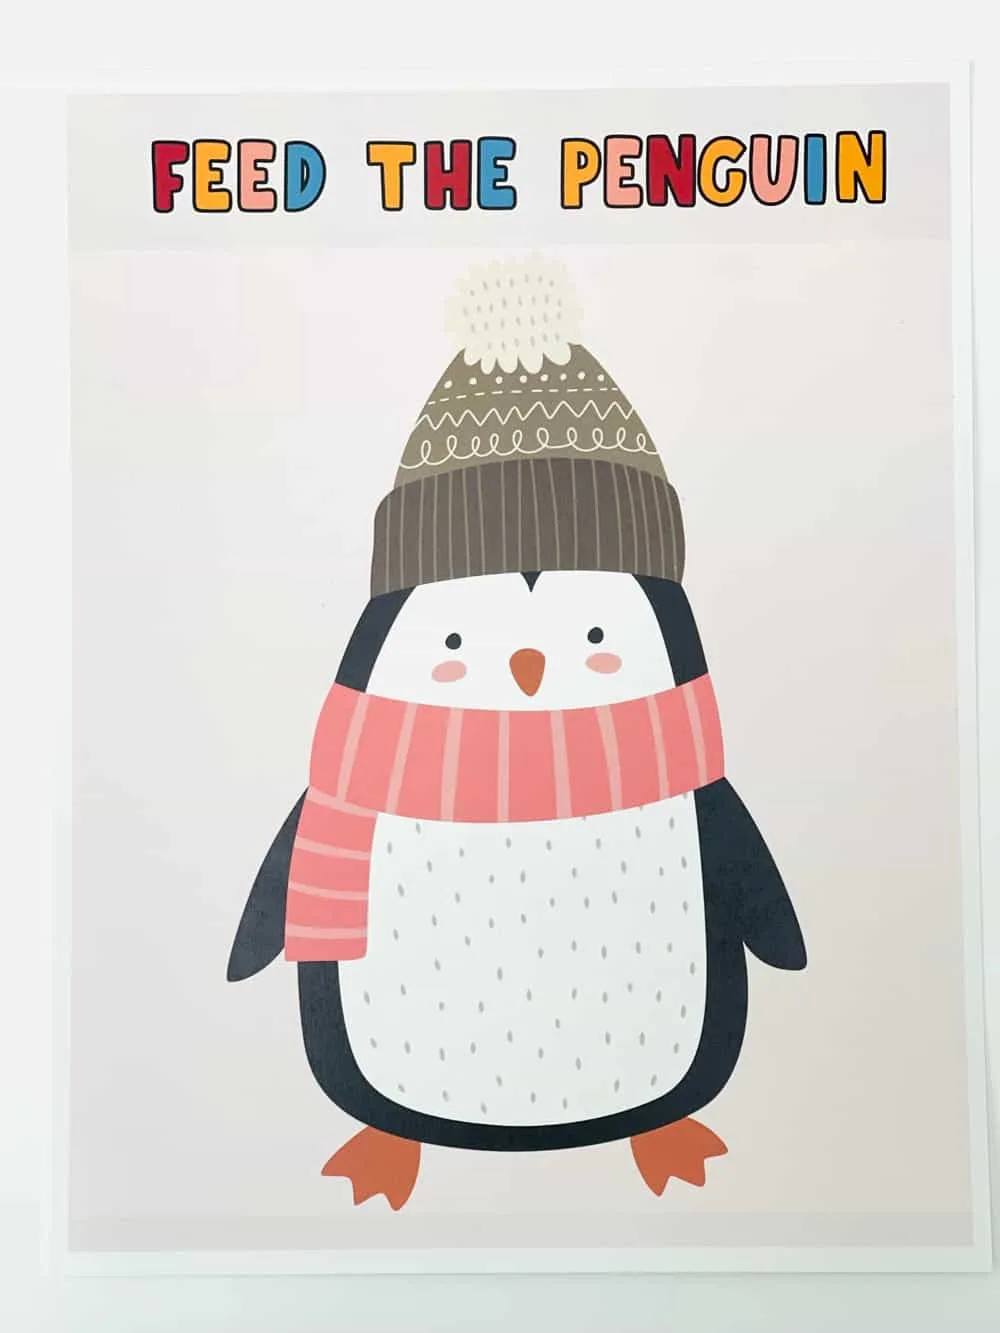 FEED THE PENGUIN WINTER ACTIVITY FOR KIDS